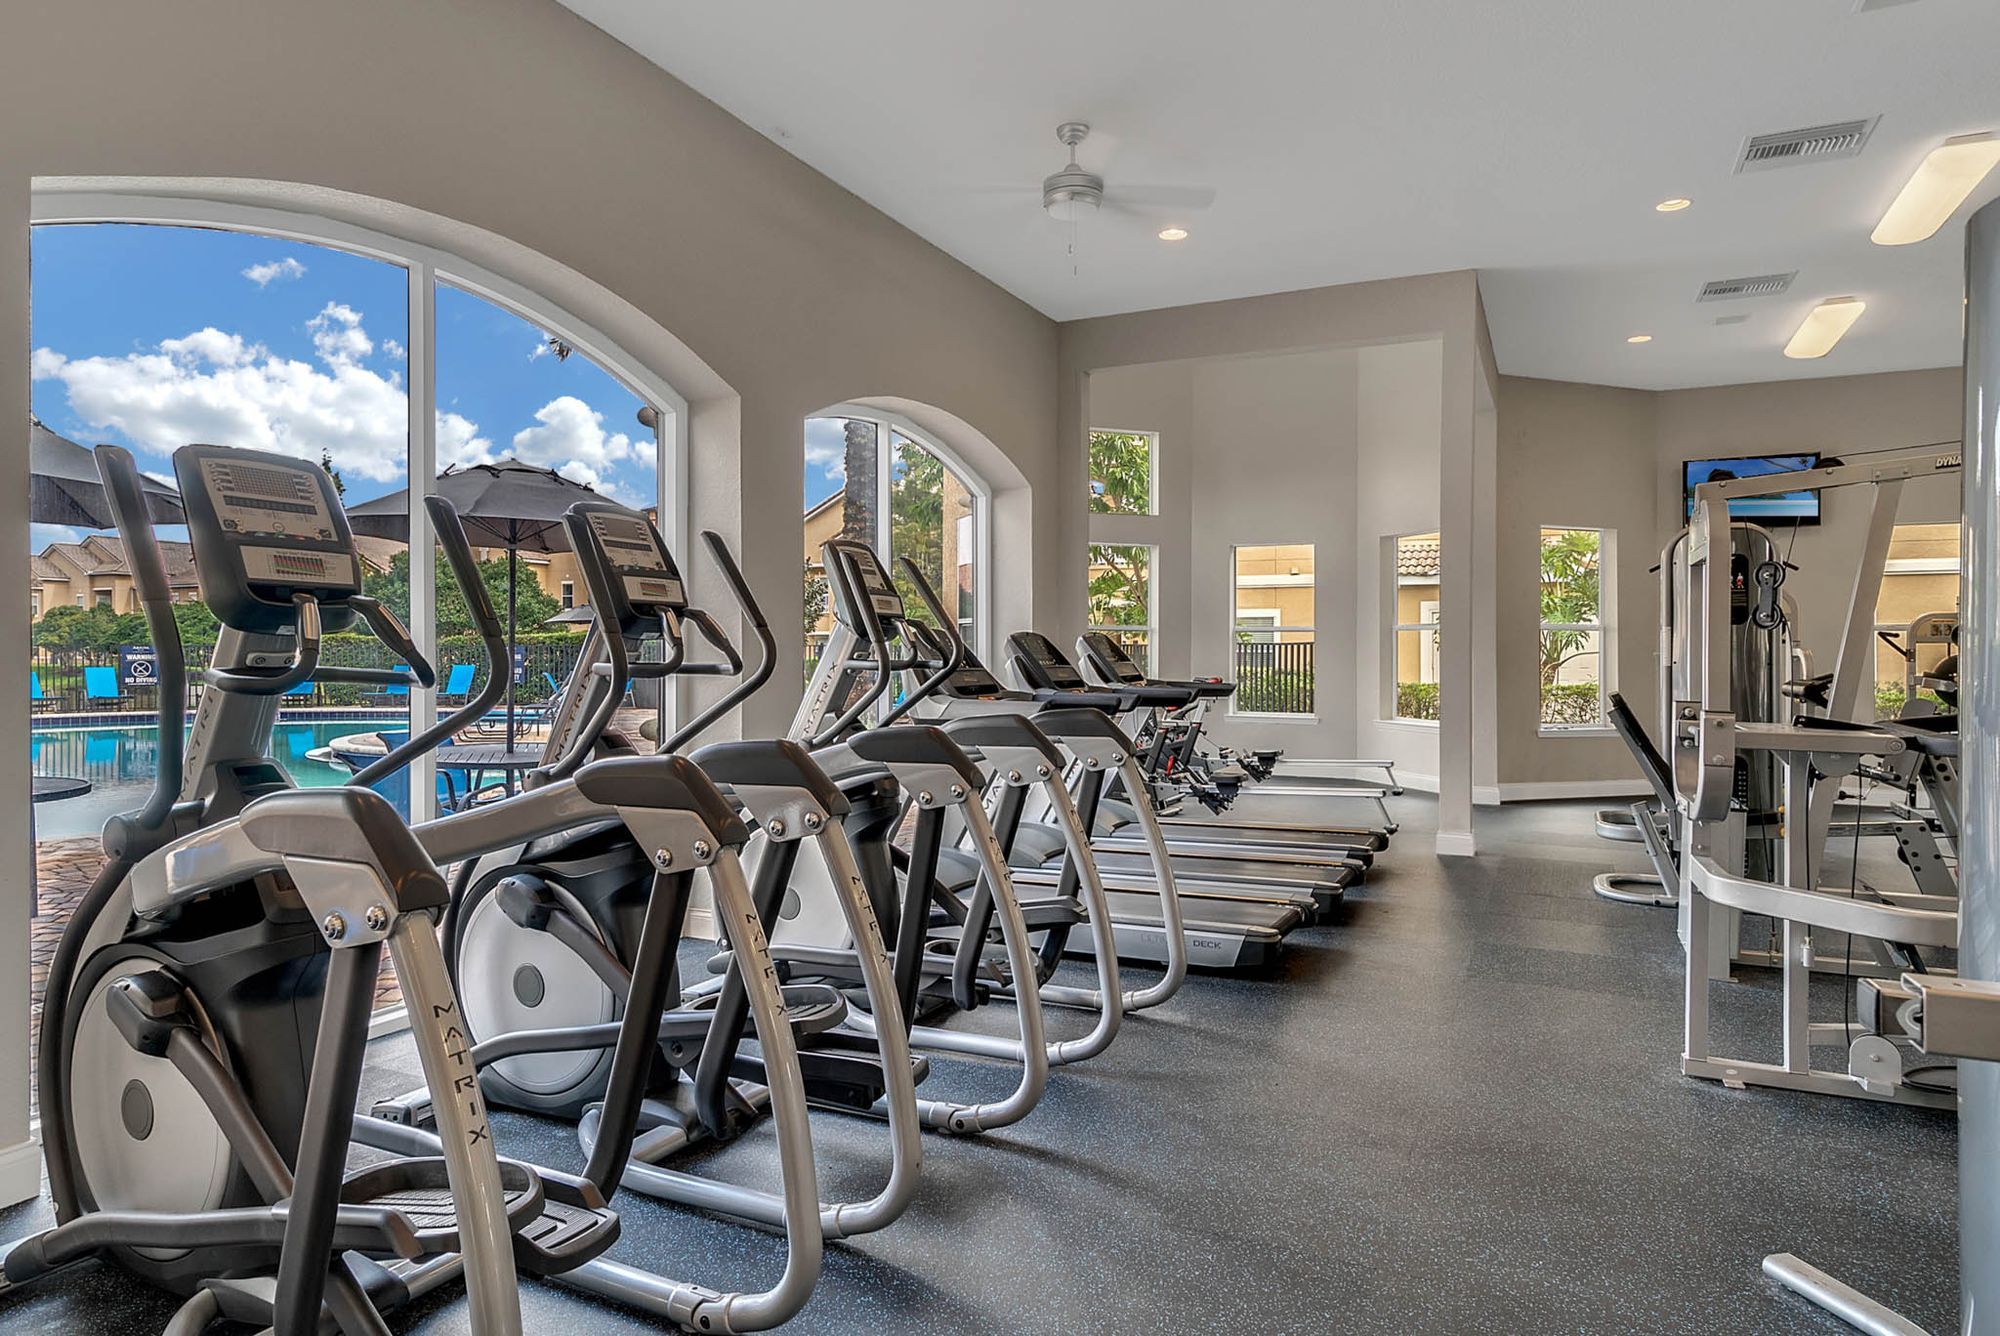 Fitness Center with cardio equipment overlooking pool